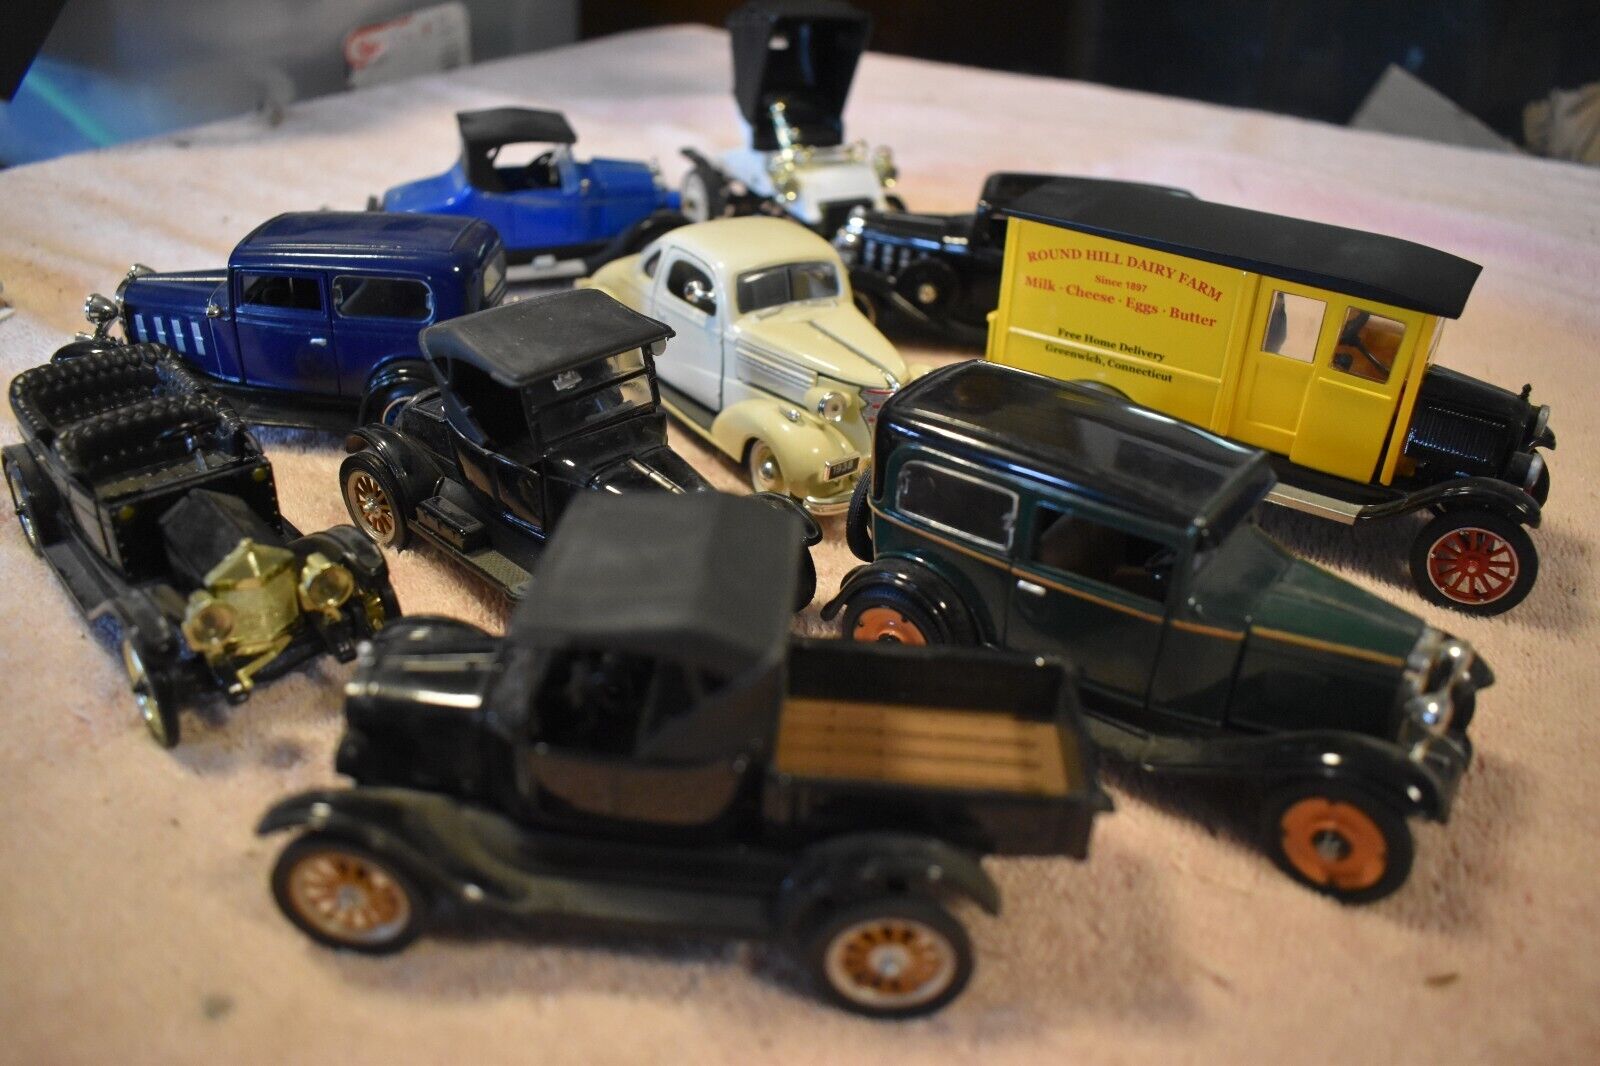 10 antique vehicle 1:32 die cast metal reproductions by Signature brand accurate